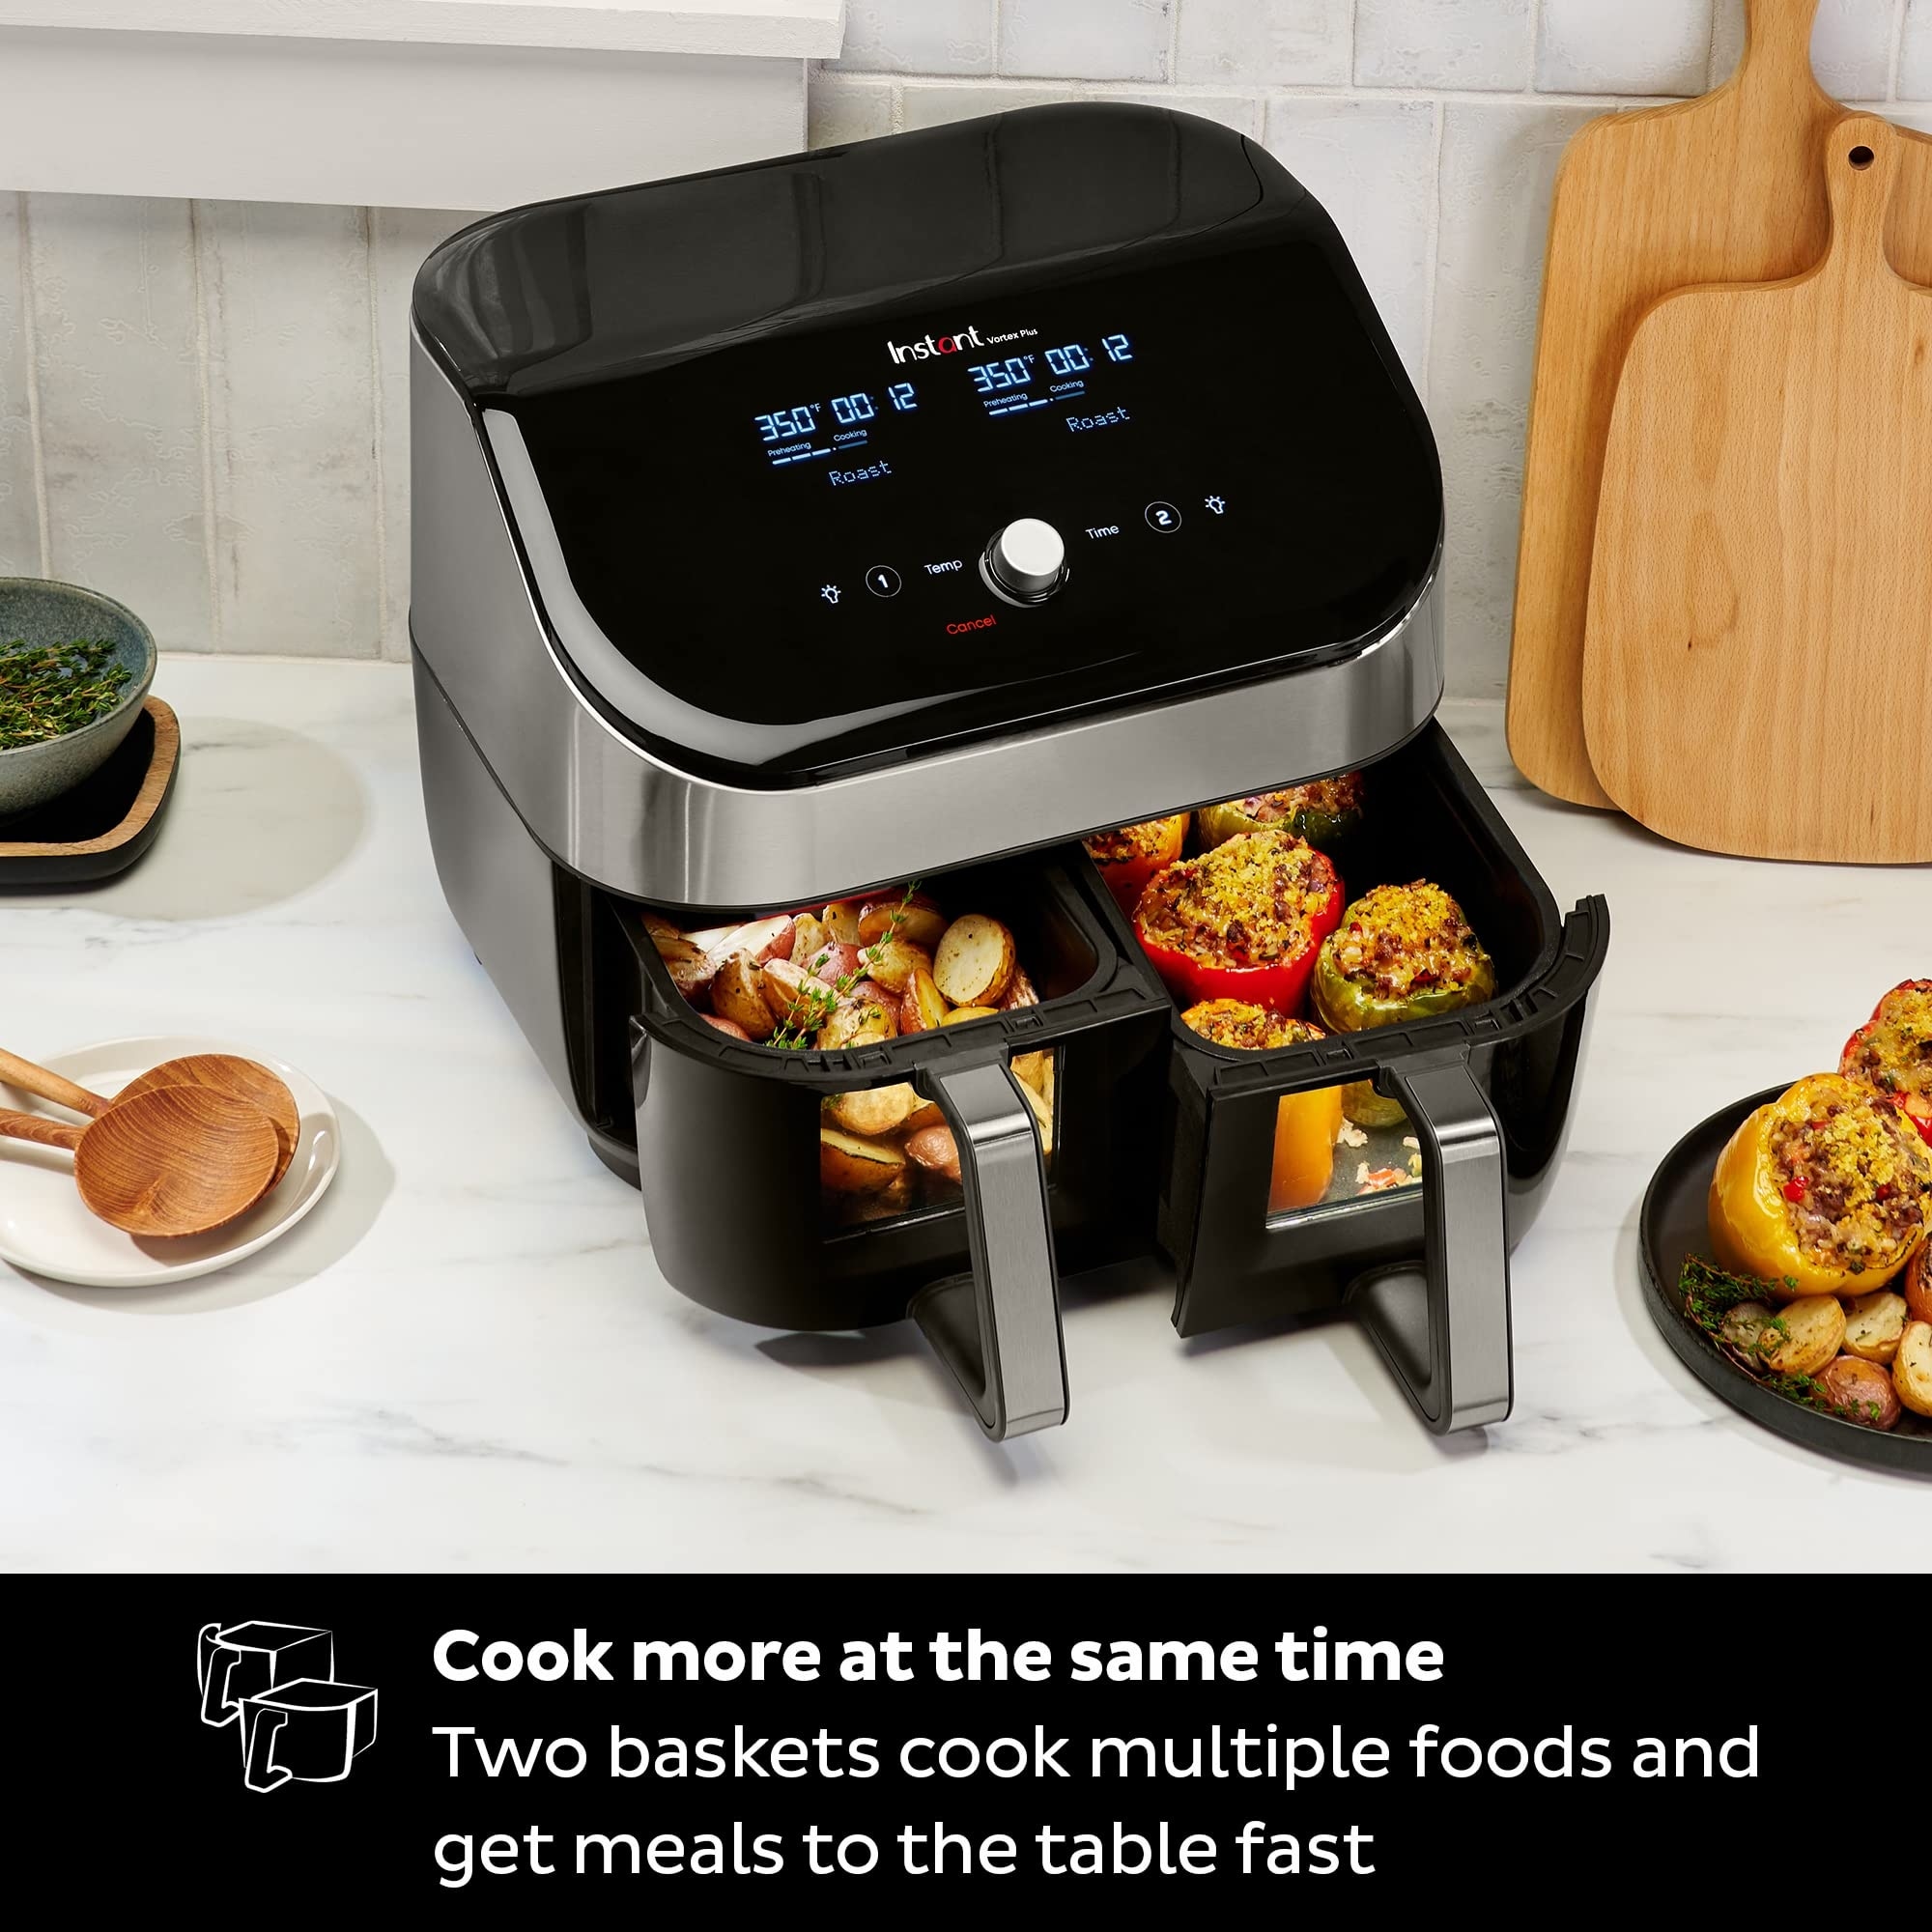 https://ak1.ostkcdn.com/images/products/is/images/direct/fae6b62b2ac4124fec37fc3baaeb5a556f9f751b/XL-8-QT-Dual-Basket-Air-Fryer-Oven%2C-2-Independent-Baskets%2CClear-Cooking-Window%2C-App-with-over-100-Recipes%2CStainless-Steel.jpg